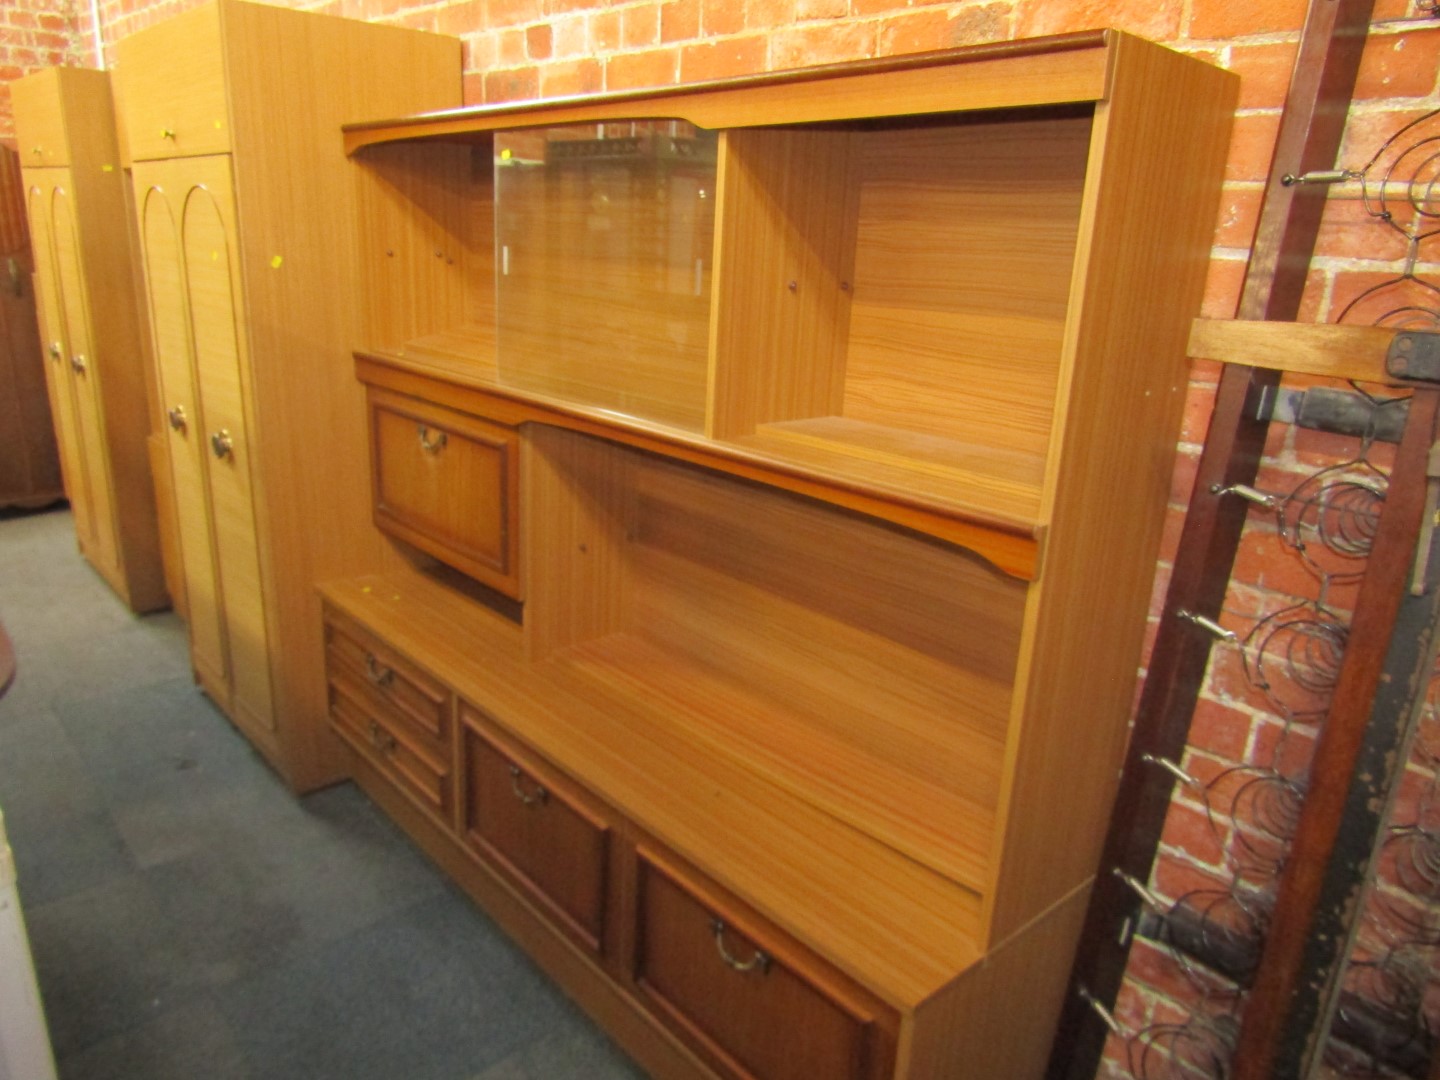 A Stateroom bedroom suite, comprising two drawer wardrobe (x 2), a six drawer chest, and a display - Image 2 of 2